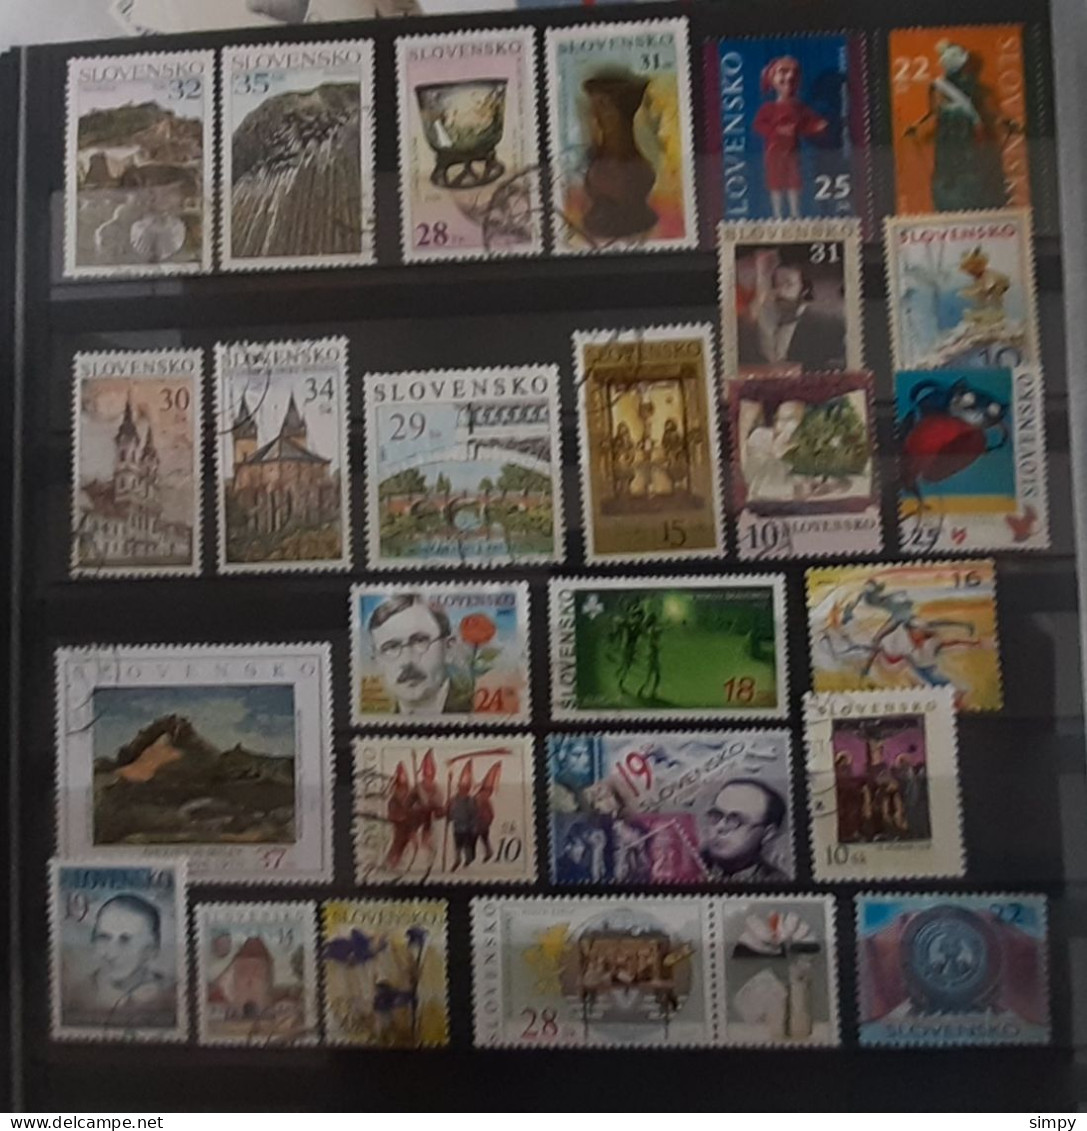 SLOVAKIA 2007 Lot Of Used Stamps - Used Stamps